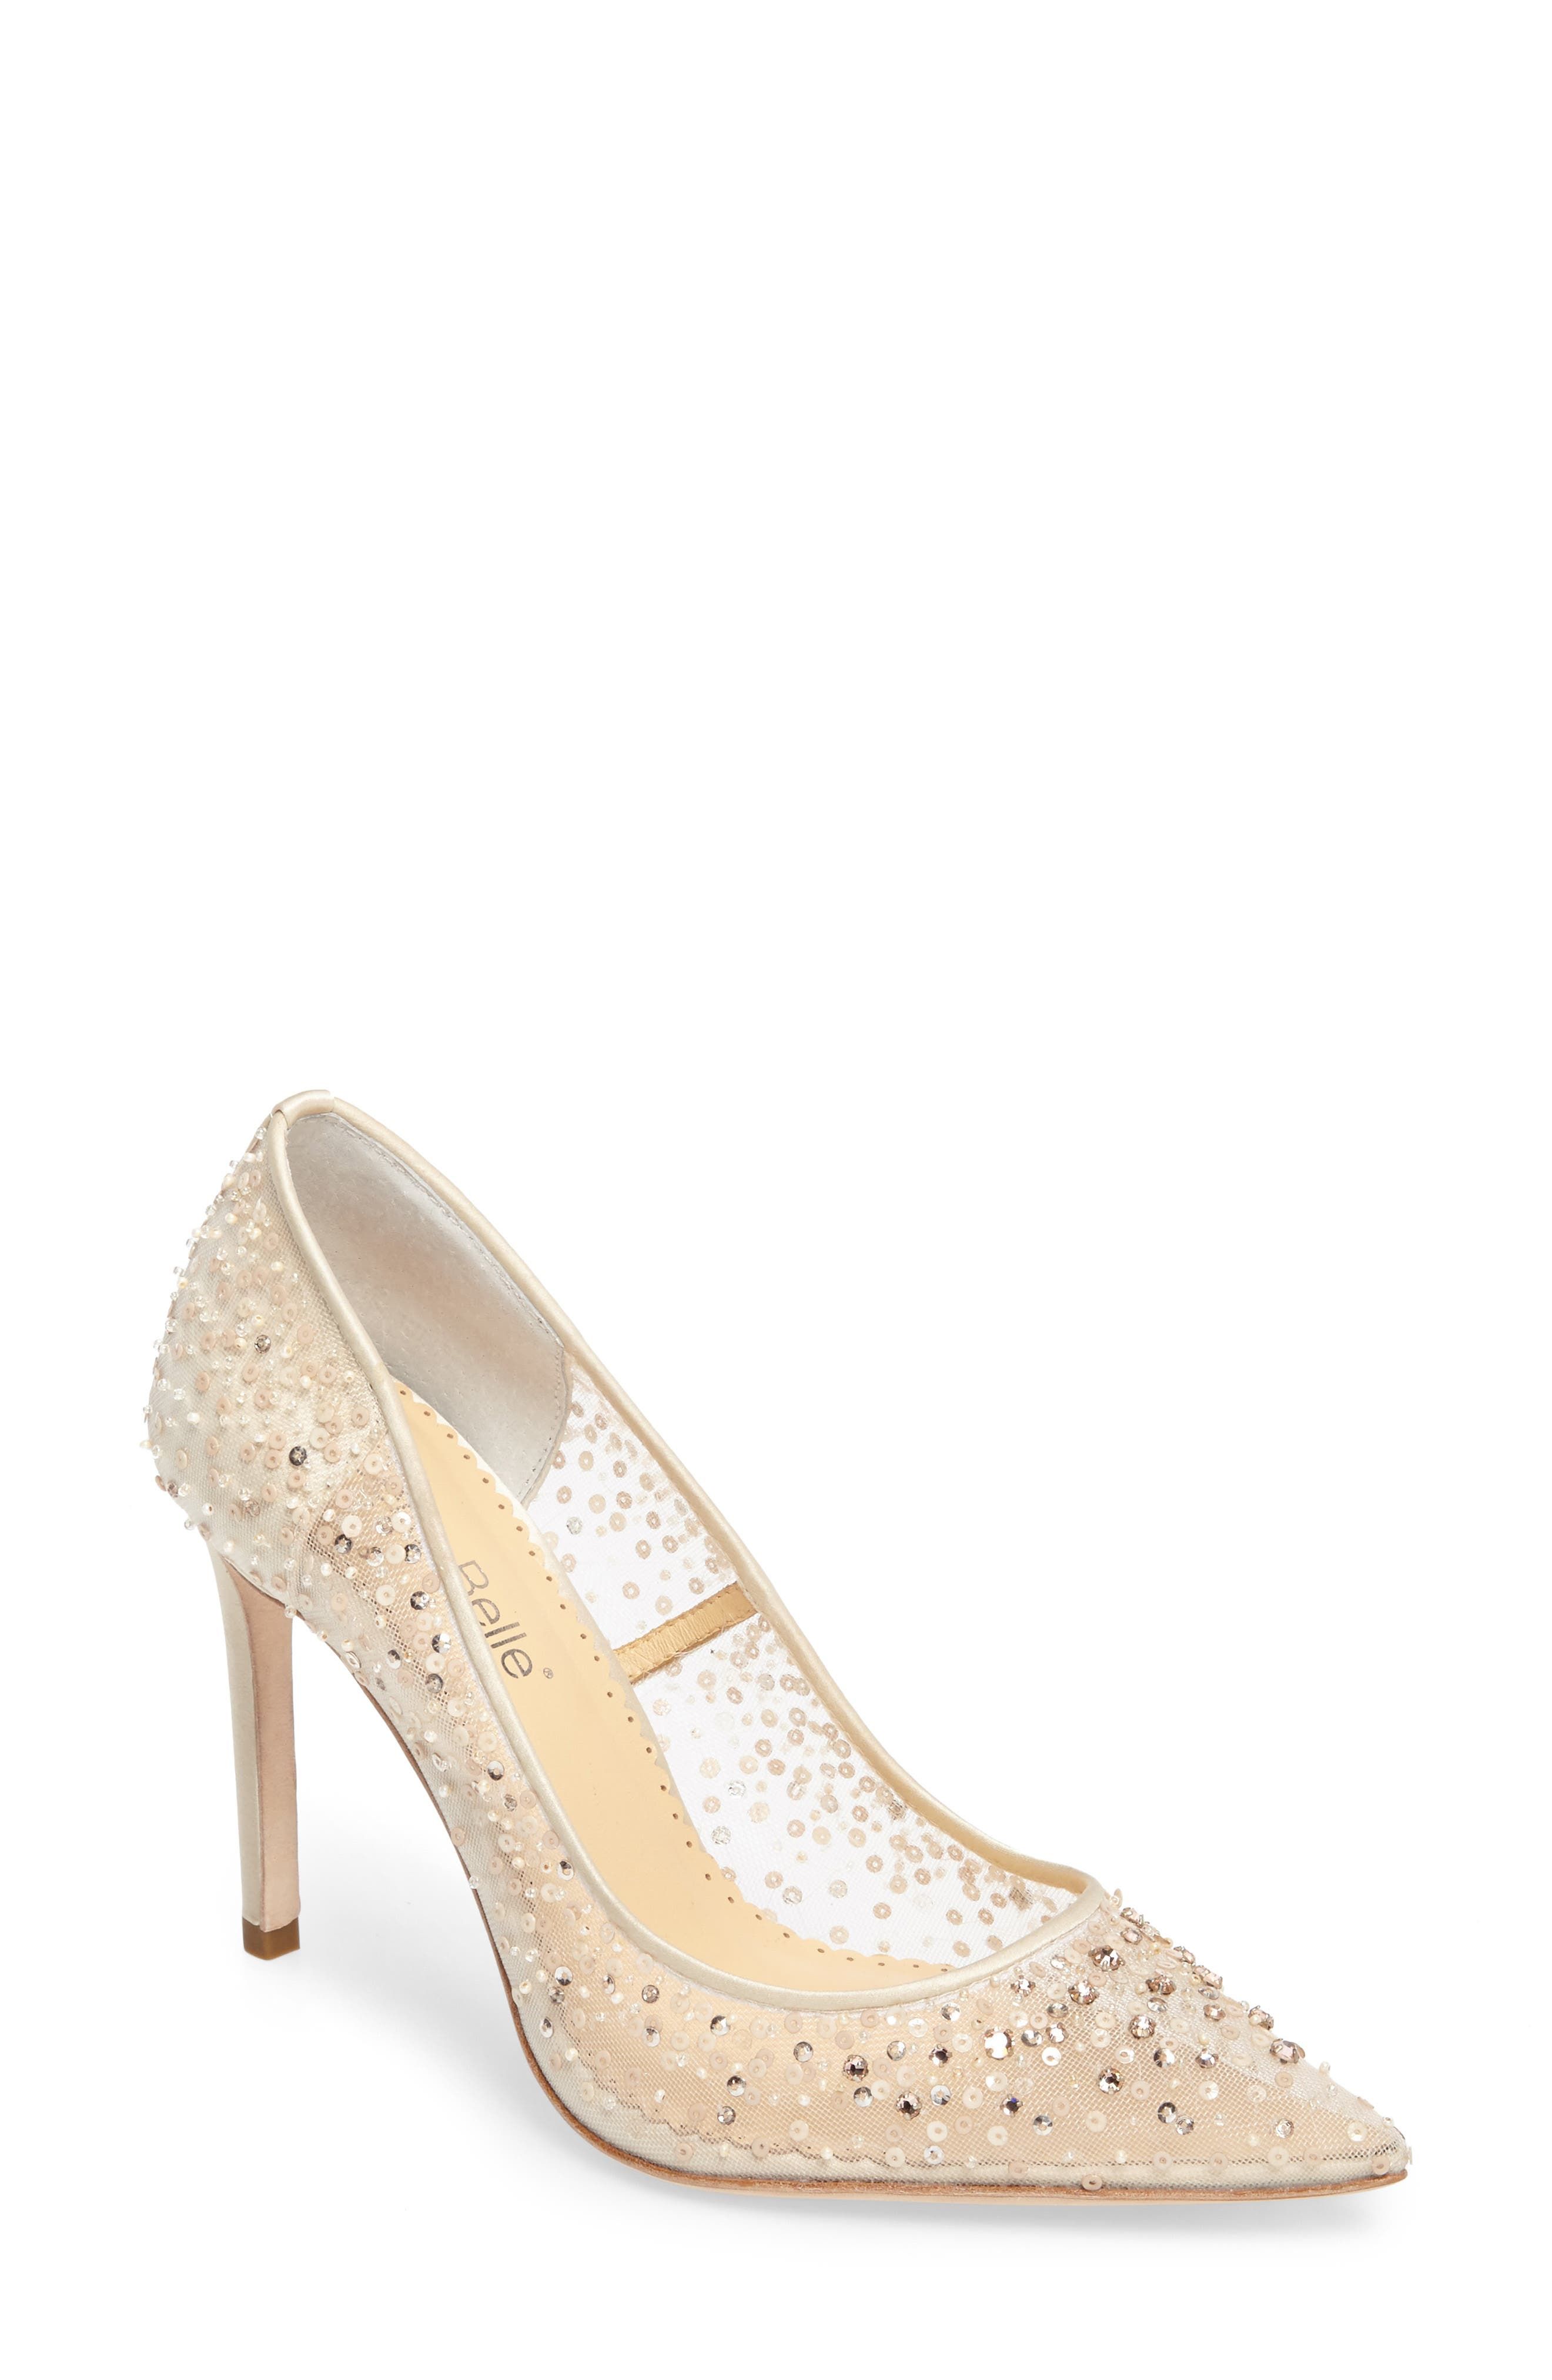 Real Leather Ivory Peep Toe Court Shoes Wedding Special Occasion